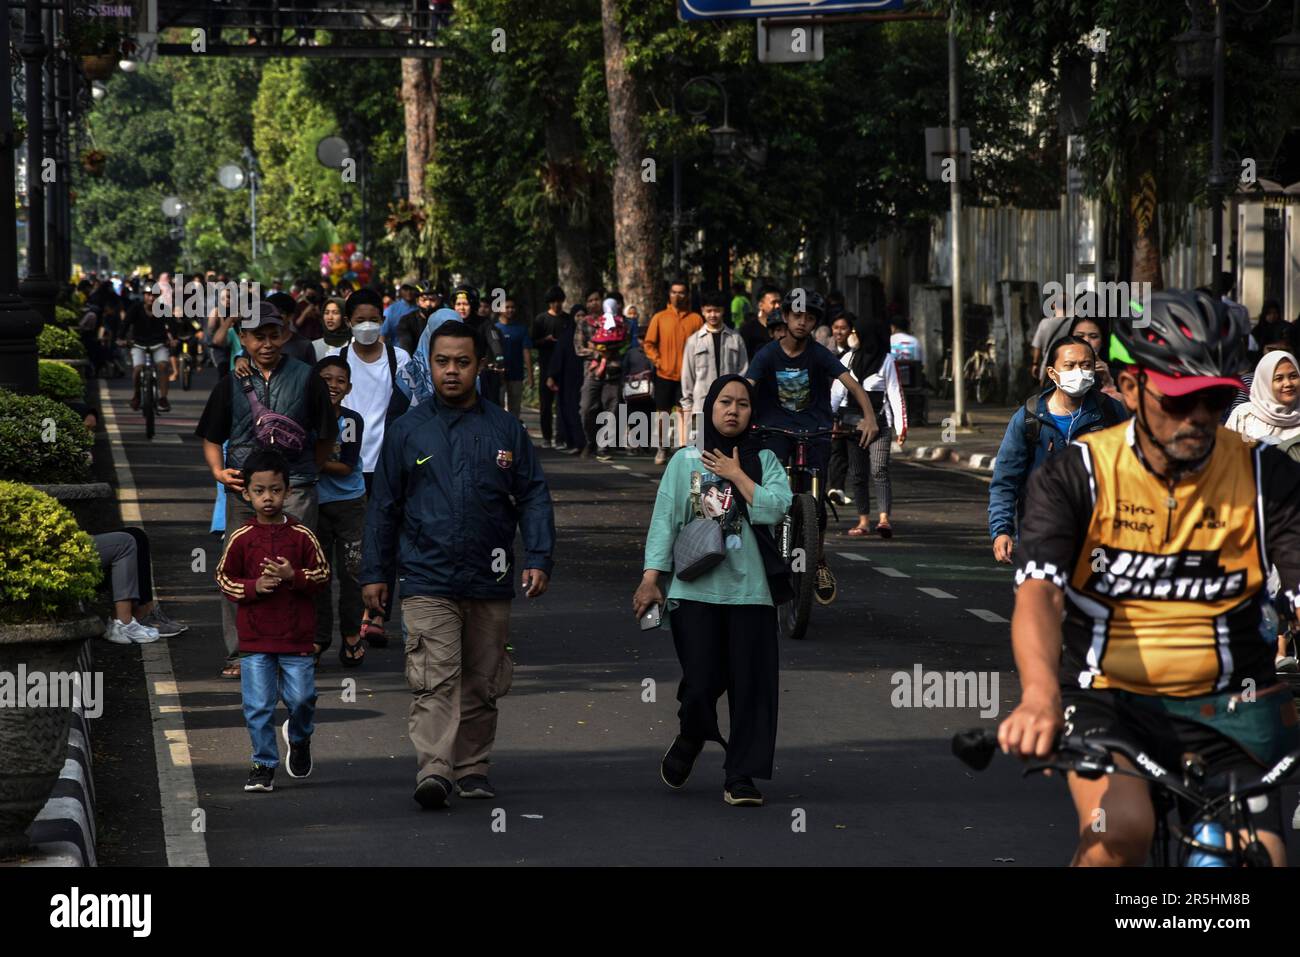 Bandung, West Java, Indonesia. June 4, 2023. People carry out Car Free Day activities on Jalan Dago, Bandung. The Bandung City Government officially conducted a car free day trial today after 3 years of experiencing a pandemic. Credit: Dimas Rachmatsyah/Alamy Live News Stock Photo